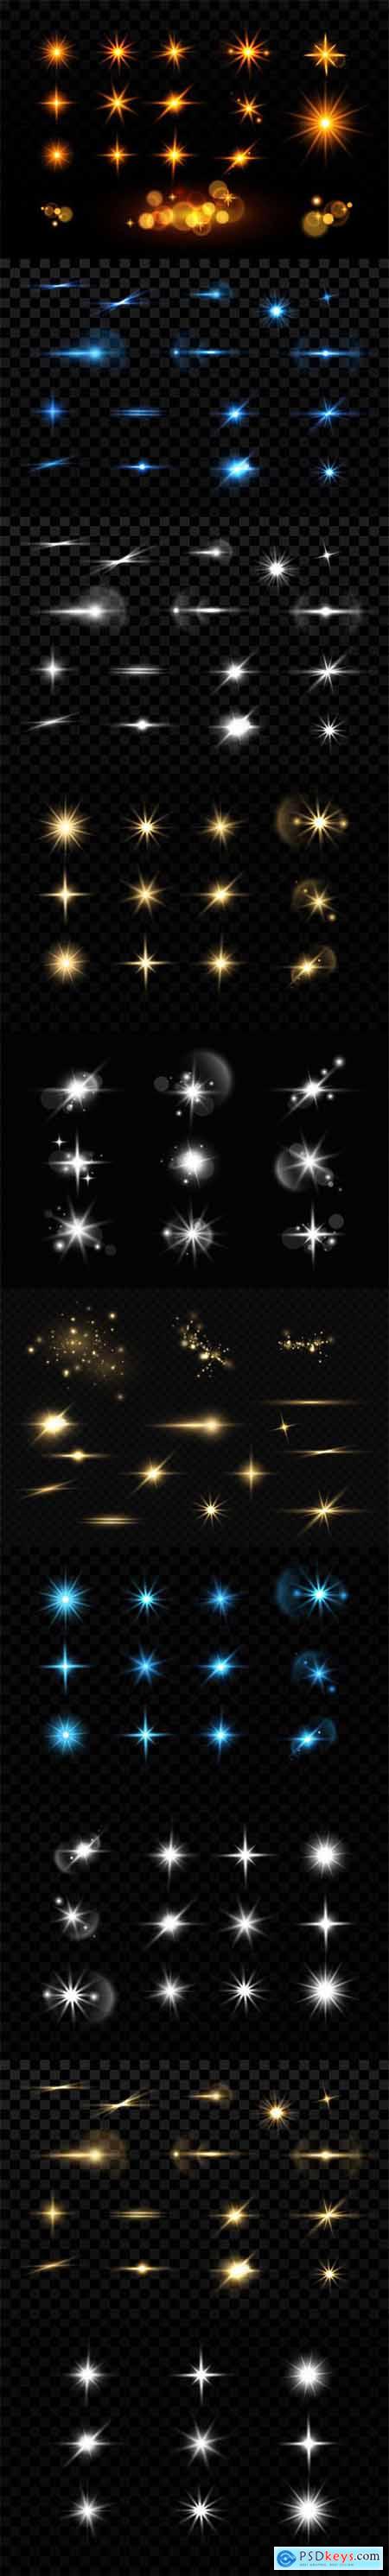 100+ Gold-Silver Stars & Lens Flare Vector Collection